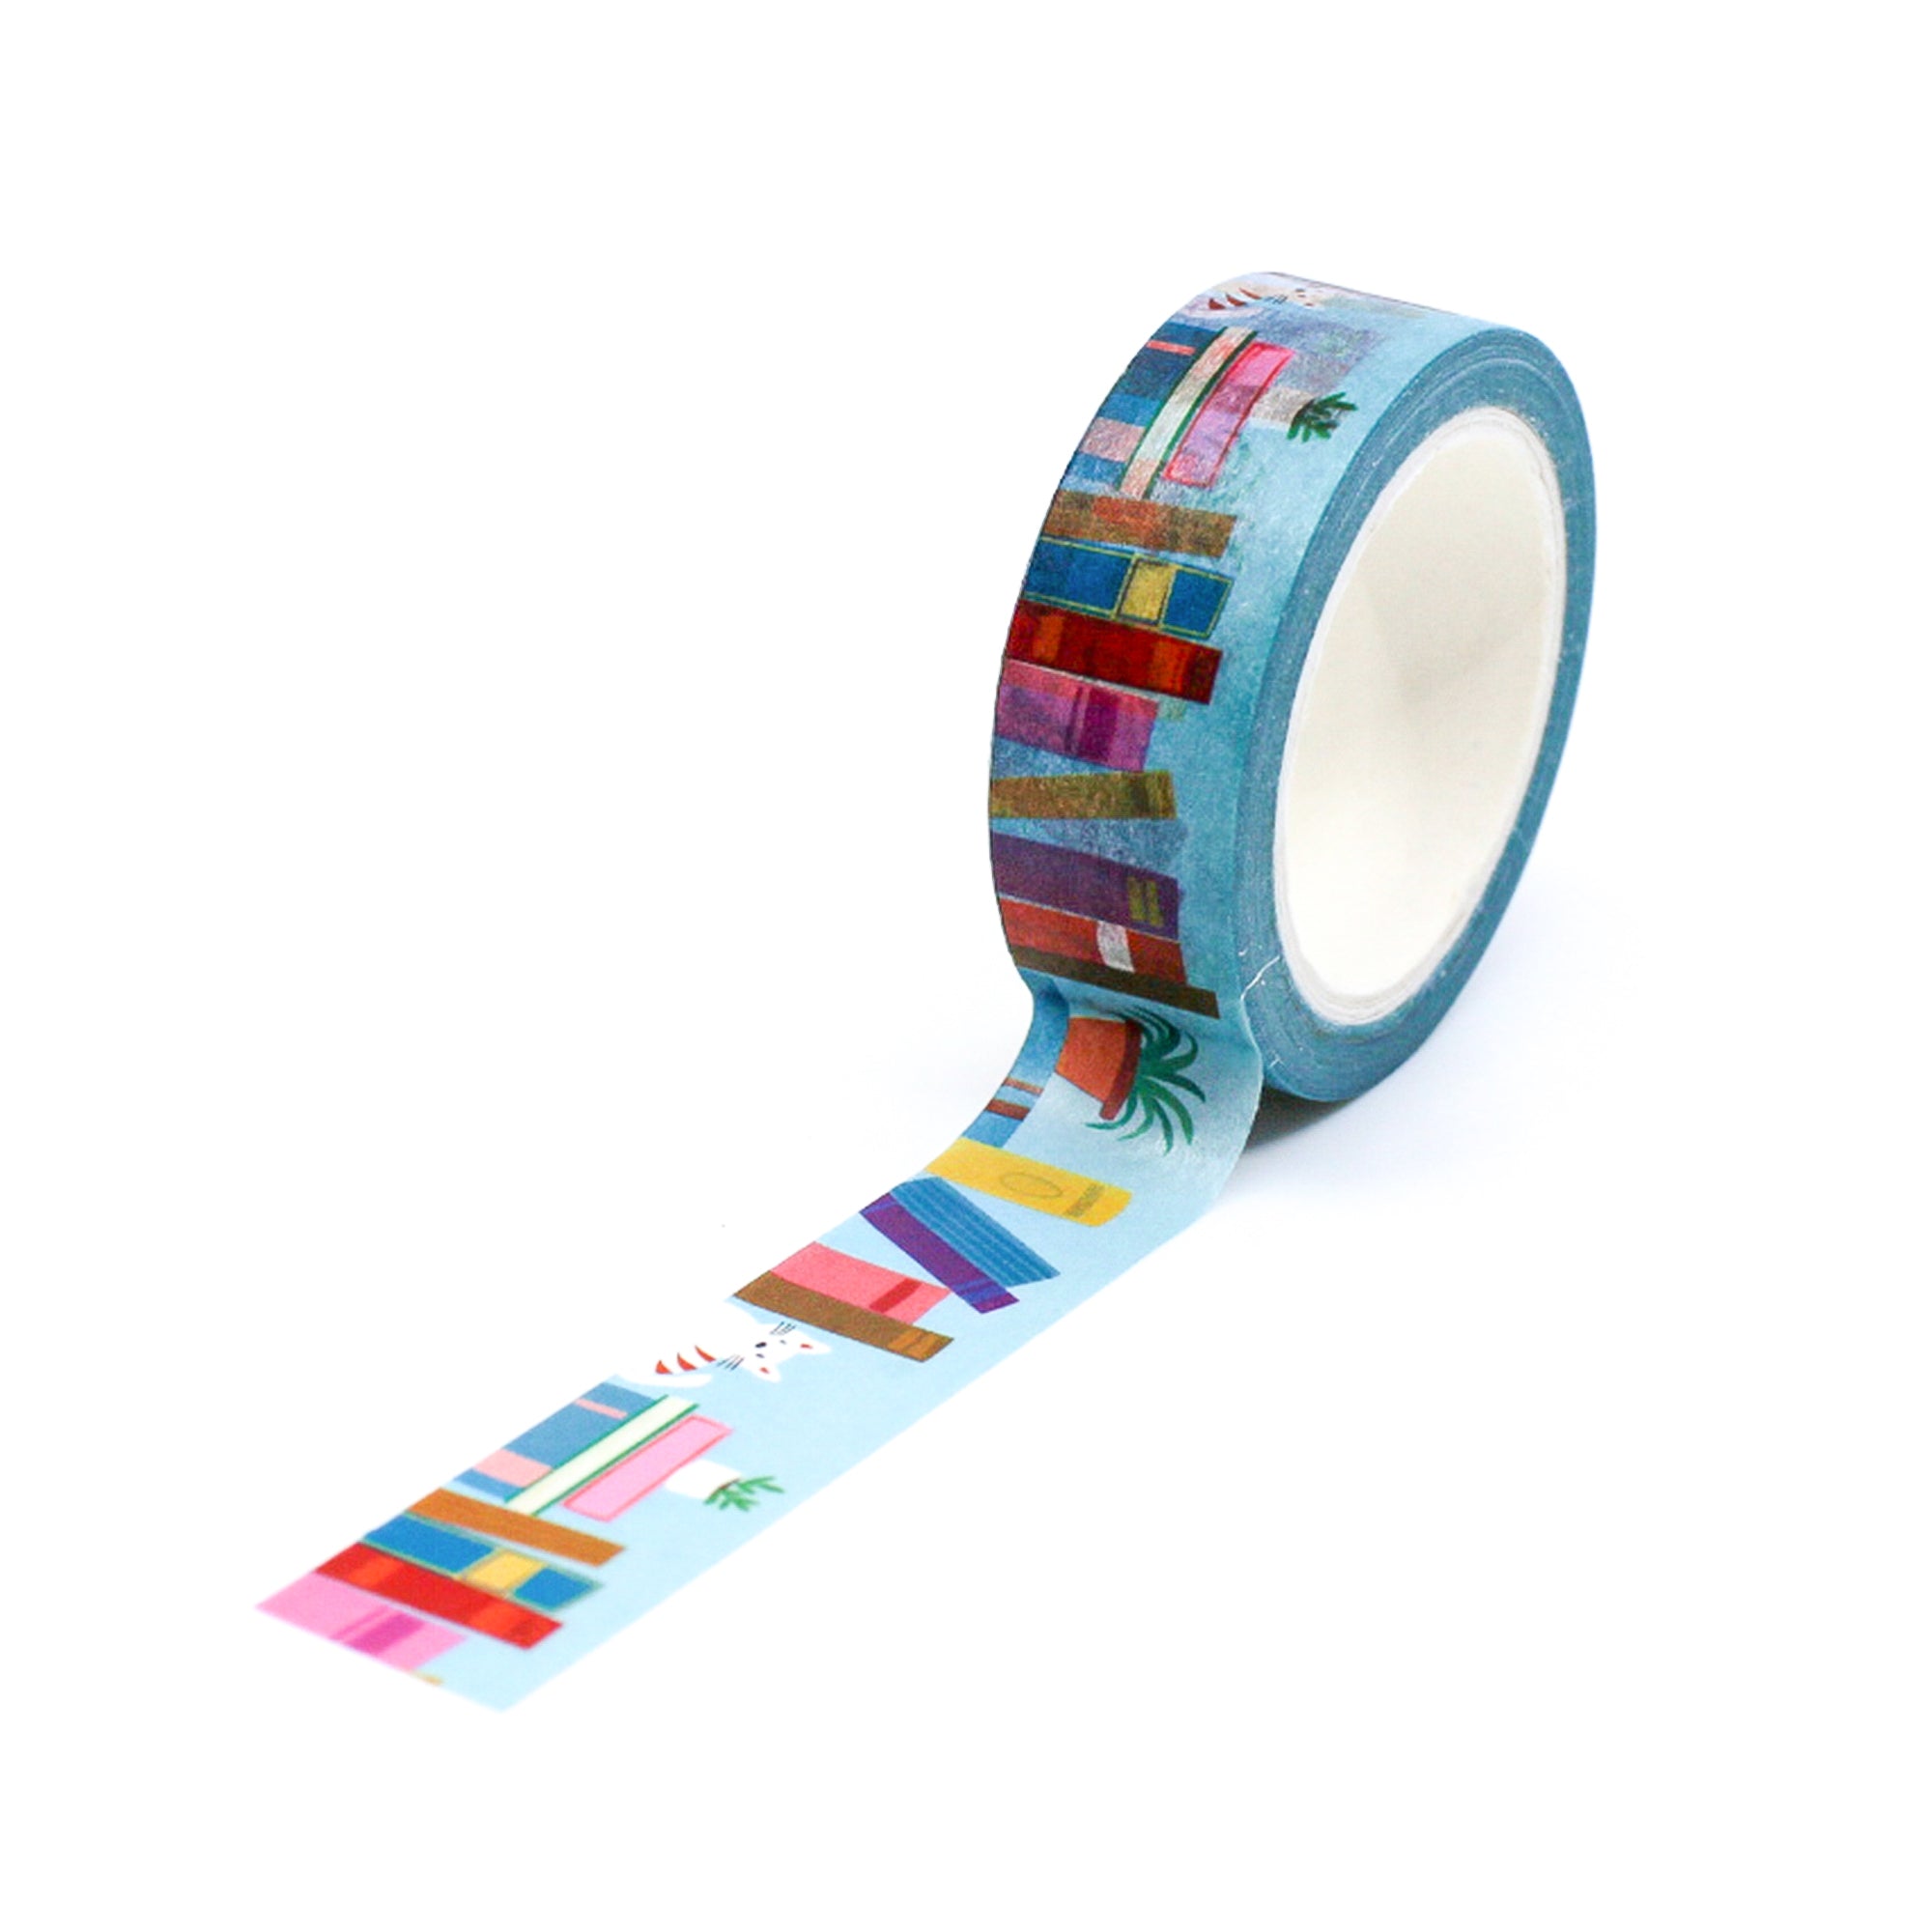 Create a cozy atmosphere in your crafts with our Cozy Library Books Washi Tape, featuring charming book illustrations. Perfect for adding a warm and bookish touch to your projects. This tape is designed by Girl of All Work and sold at BBB Supplies Craft Shop.